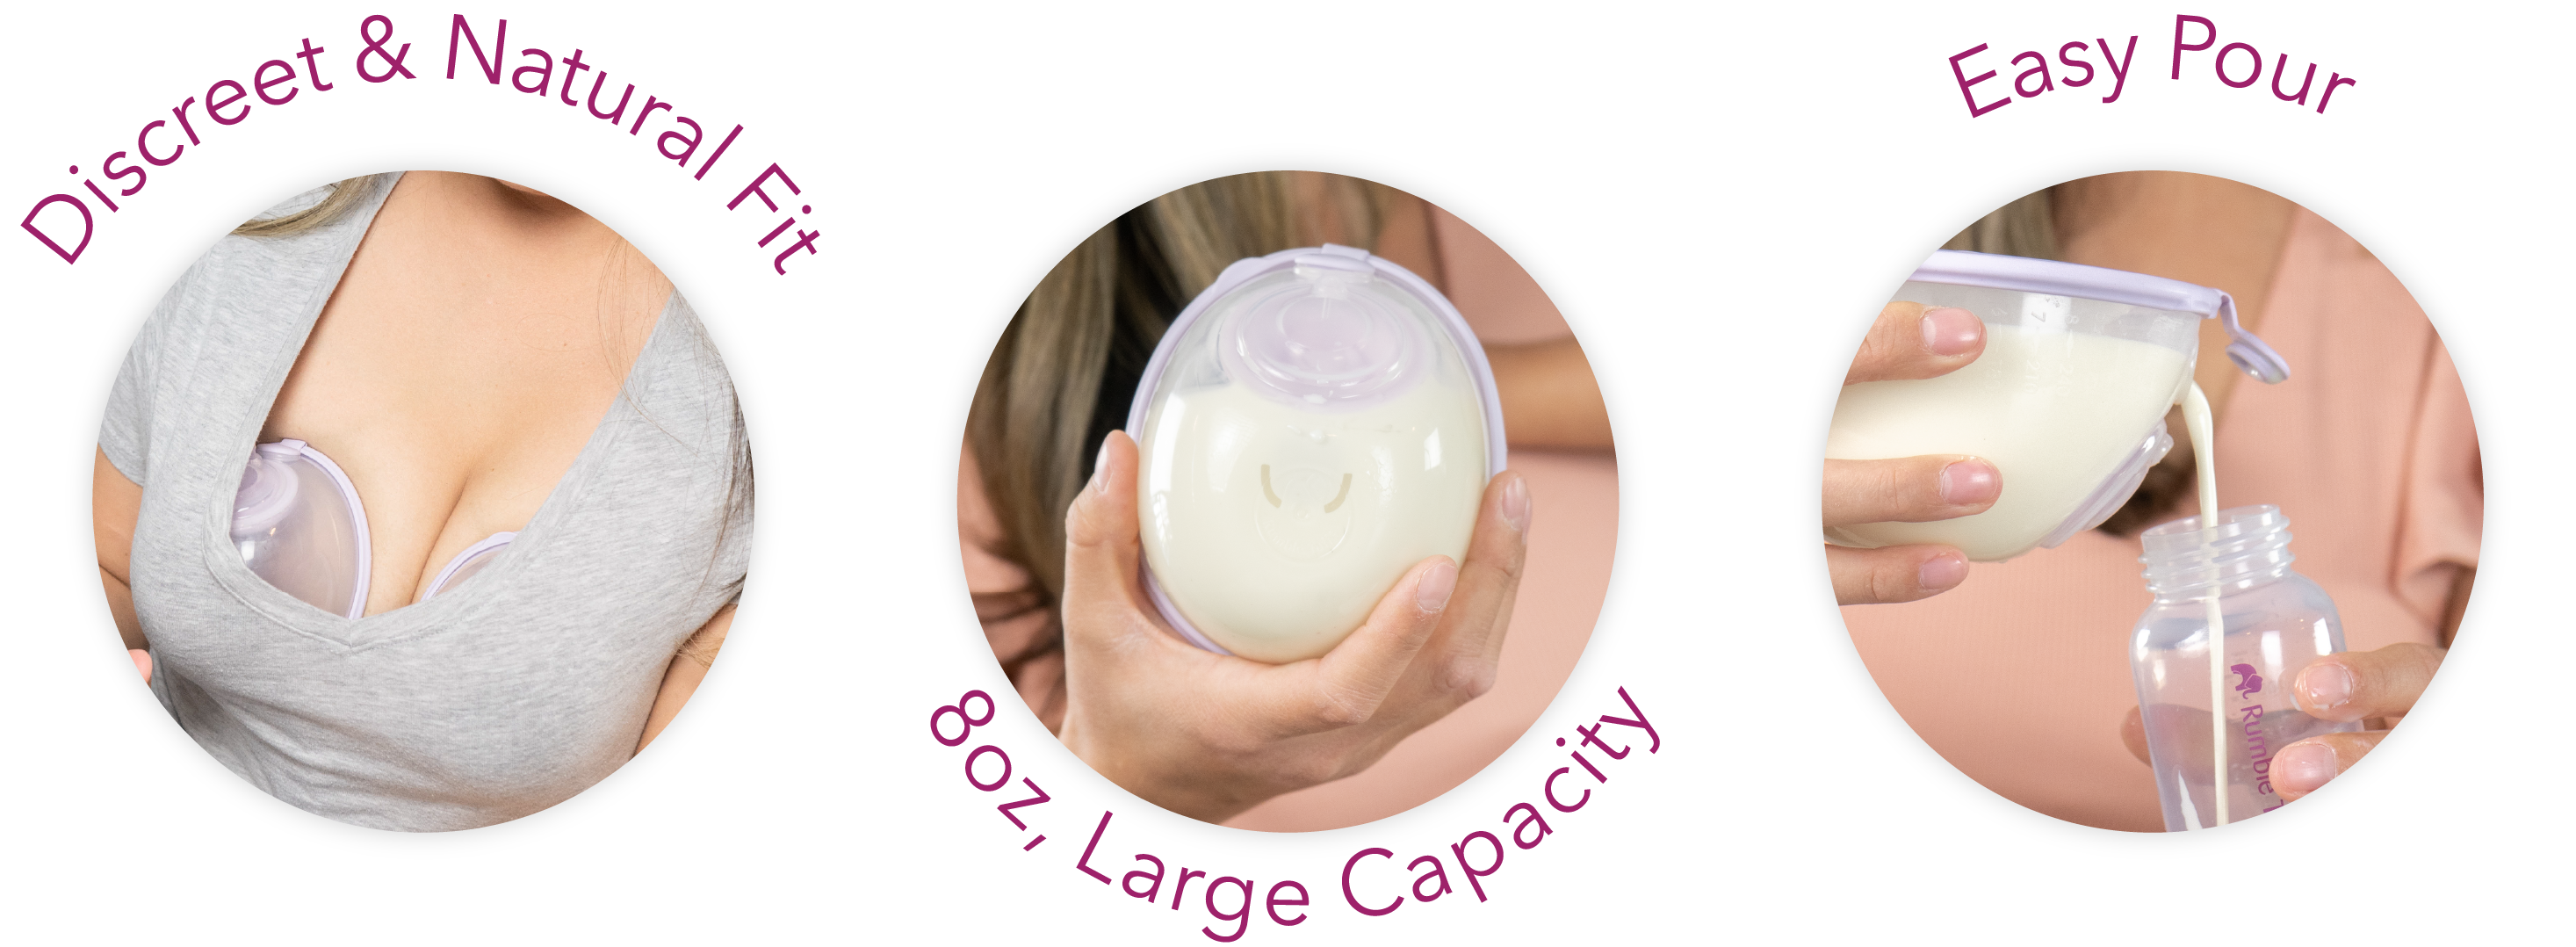 Go Cup Breast Milk Collection Cup Features